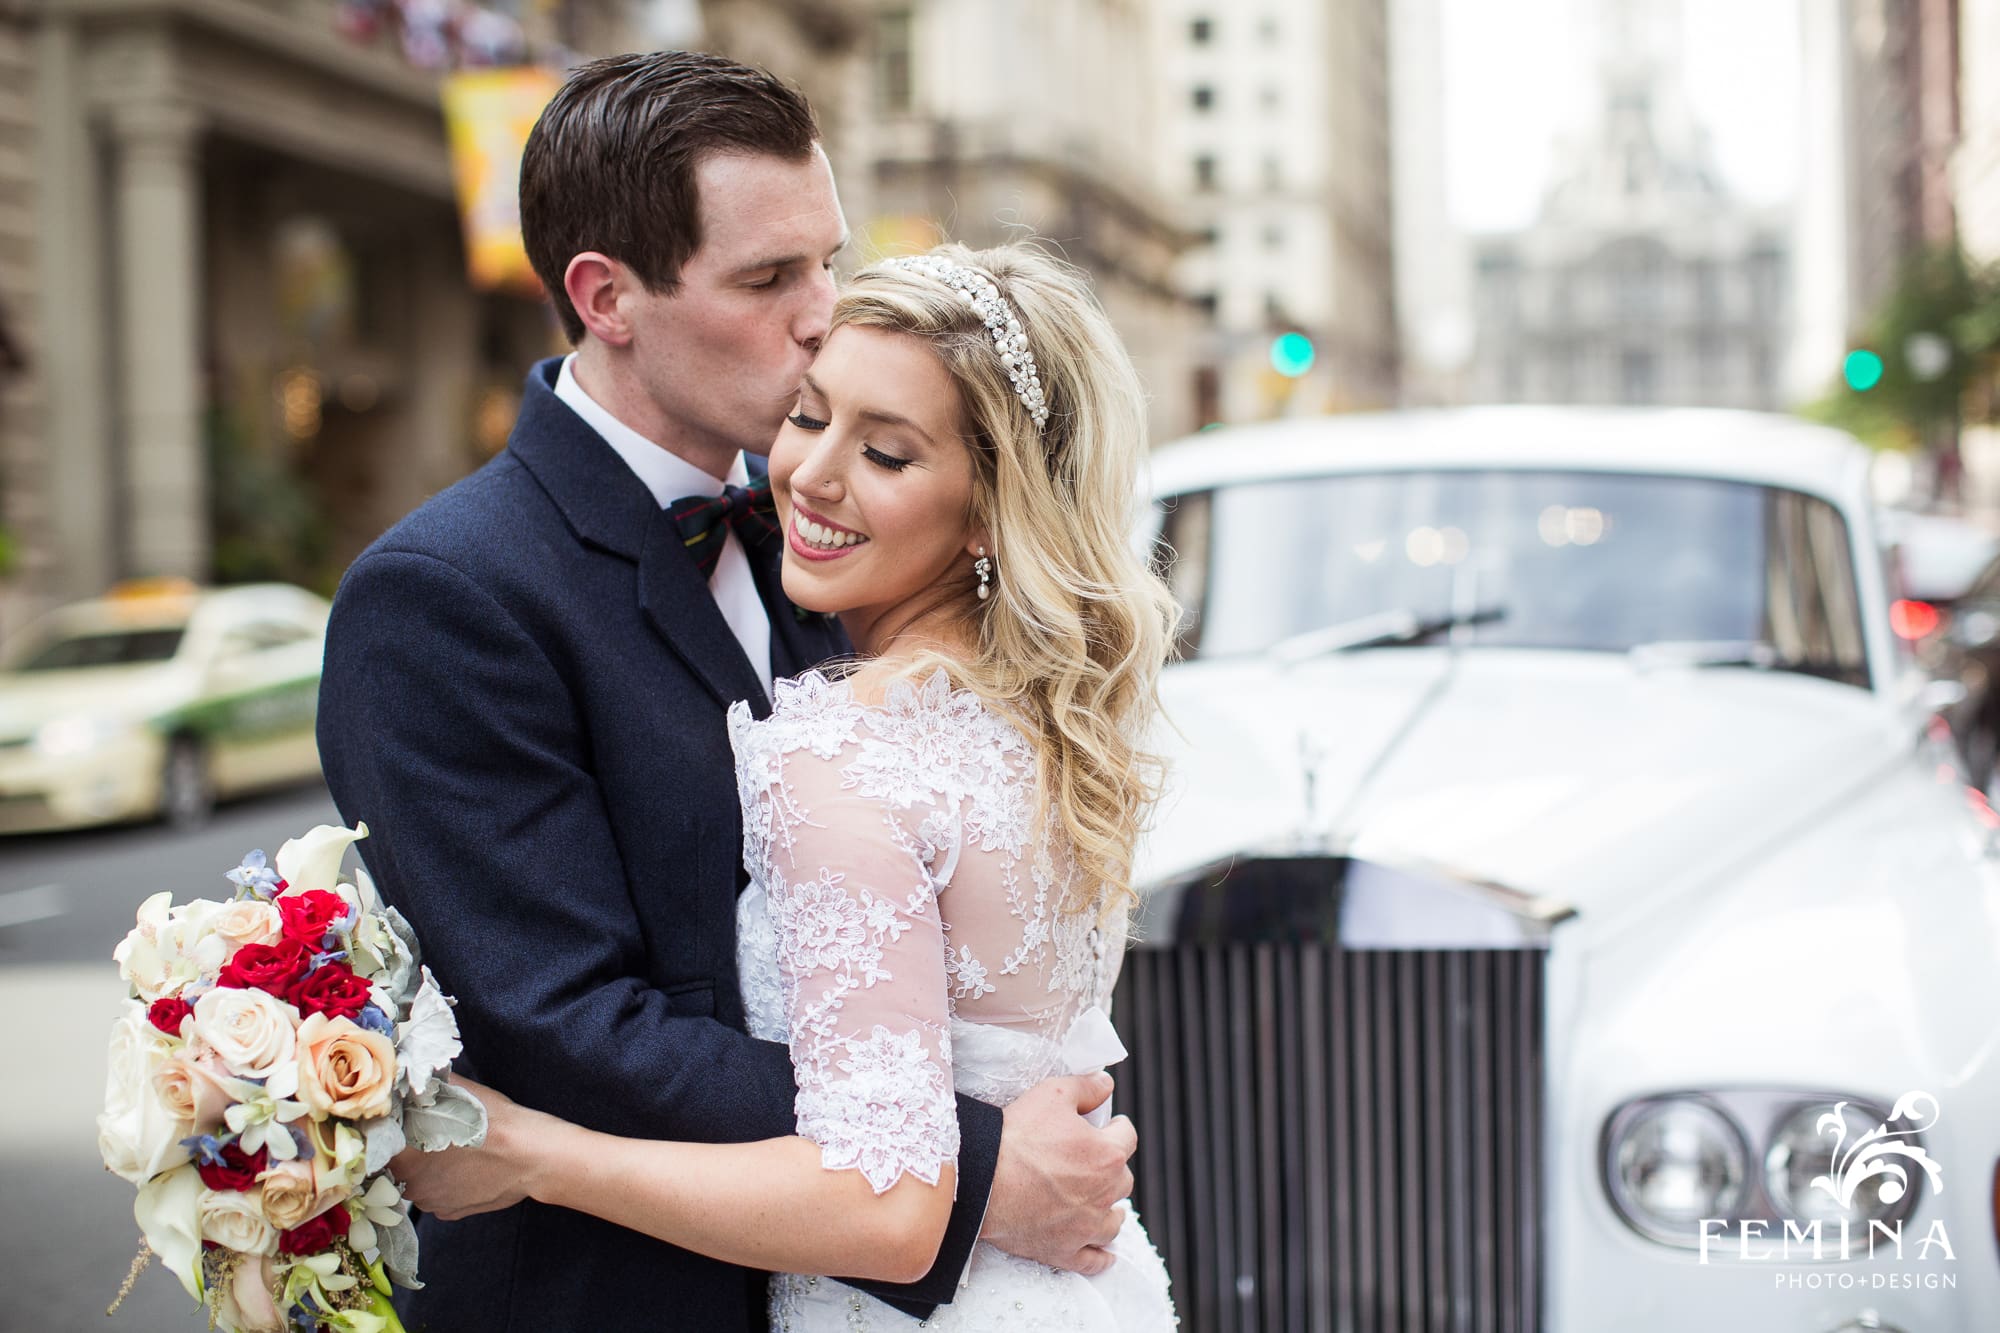 Lyall kisses his bride Rebecca on the forehead in front of their Rolls Royce on Broad St in Philadelphia